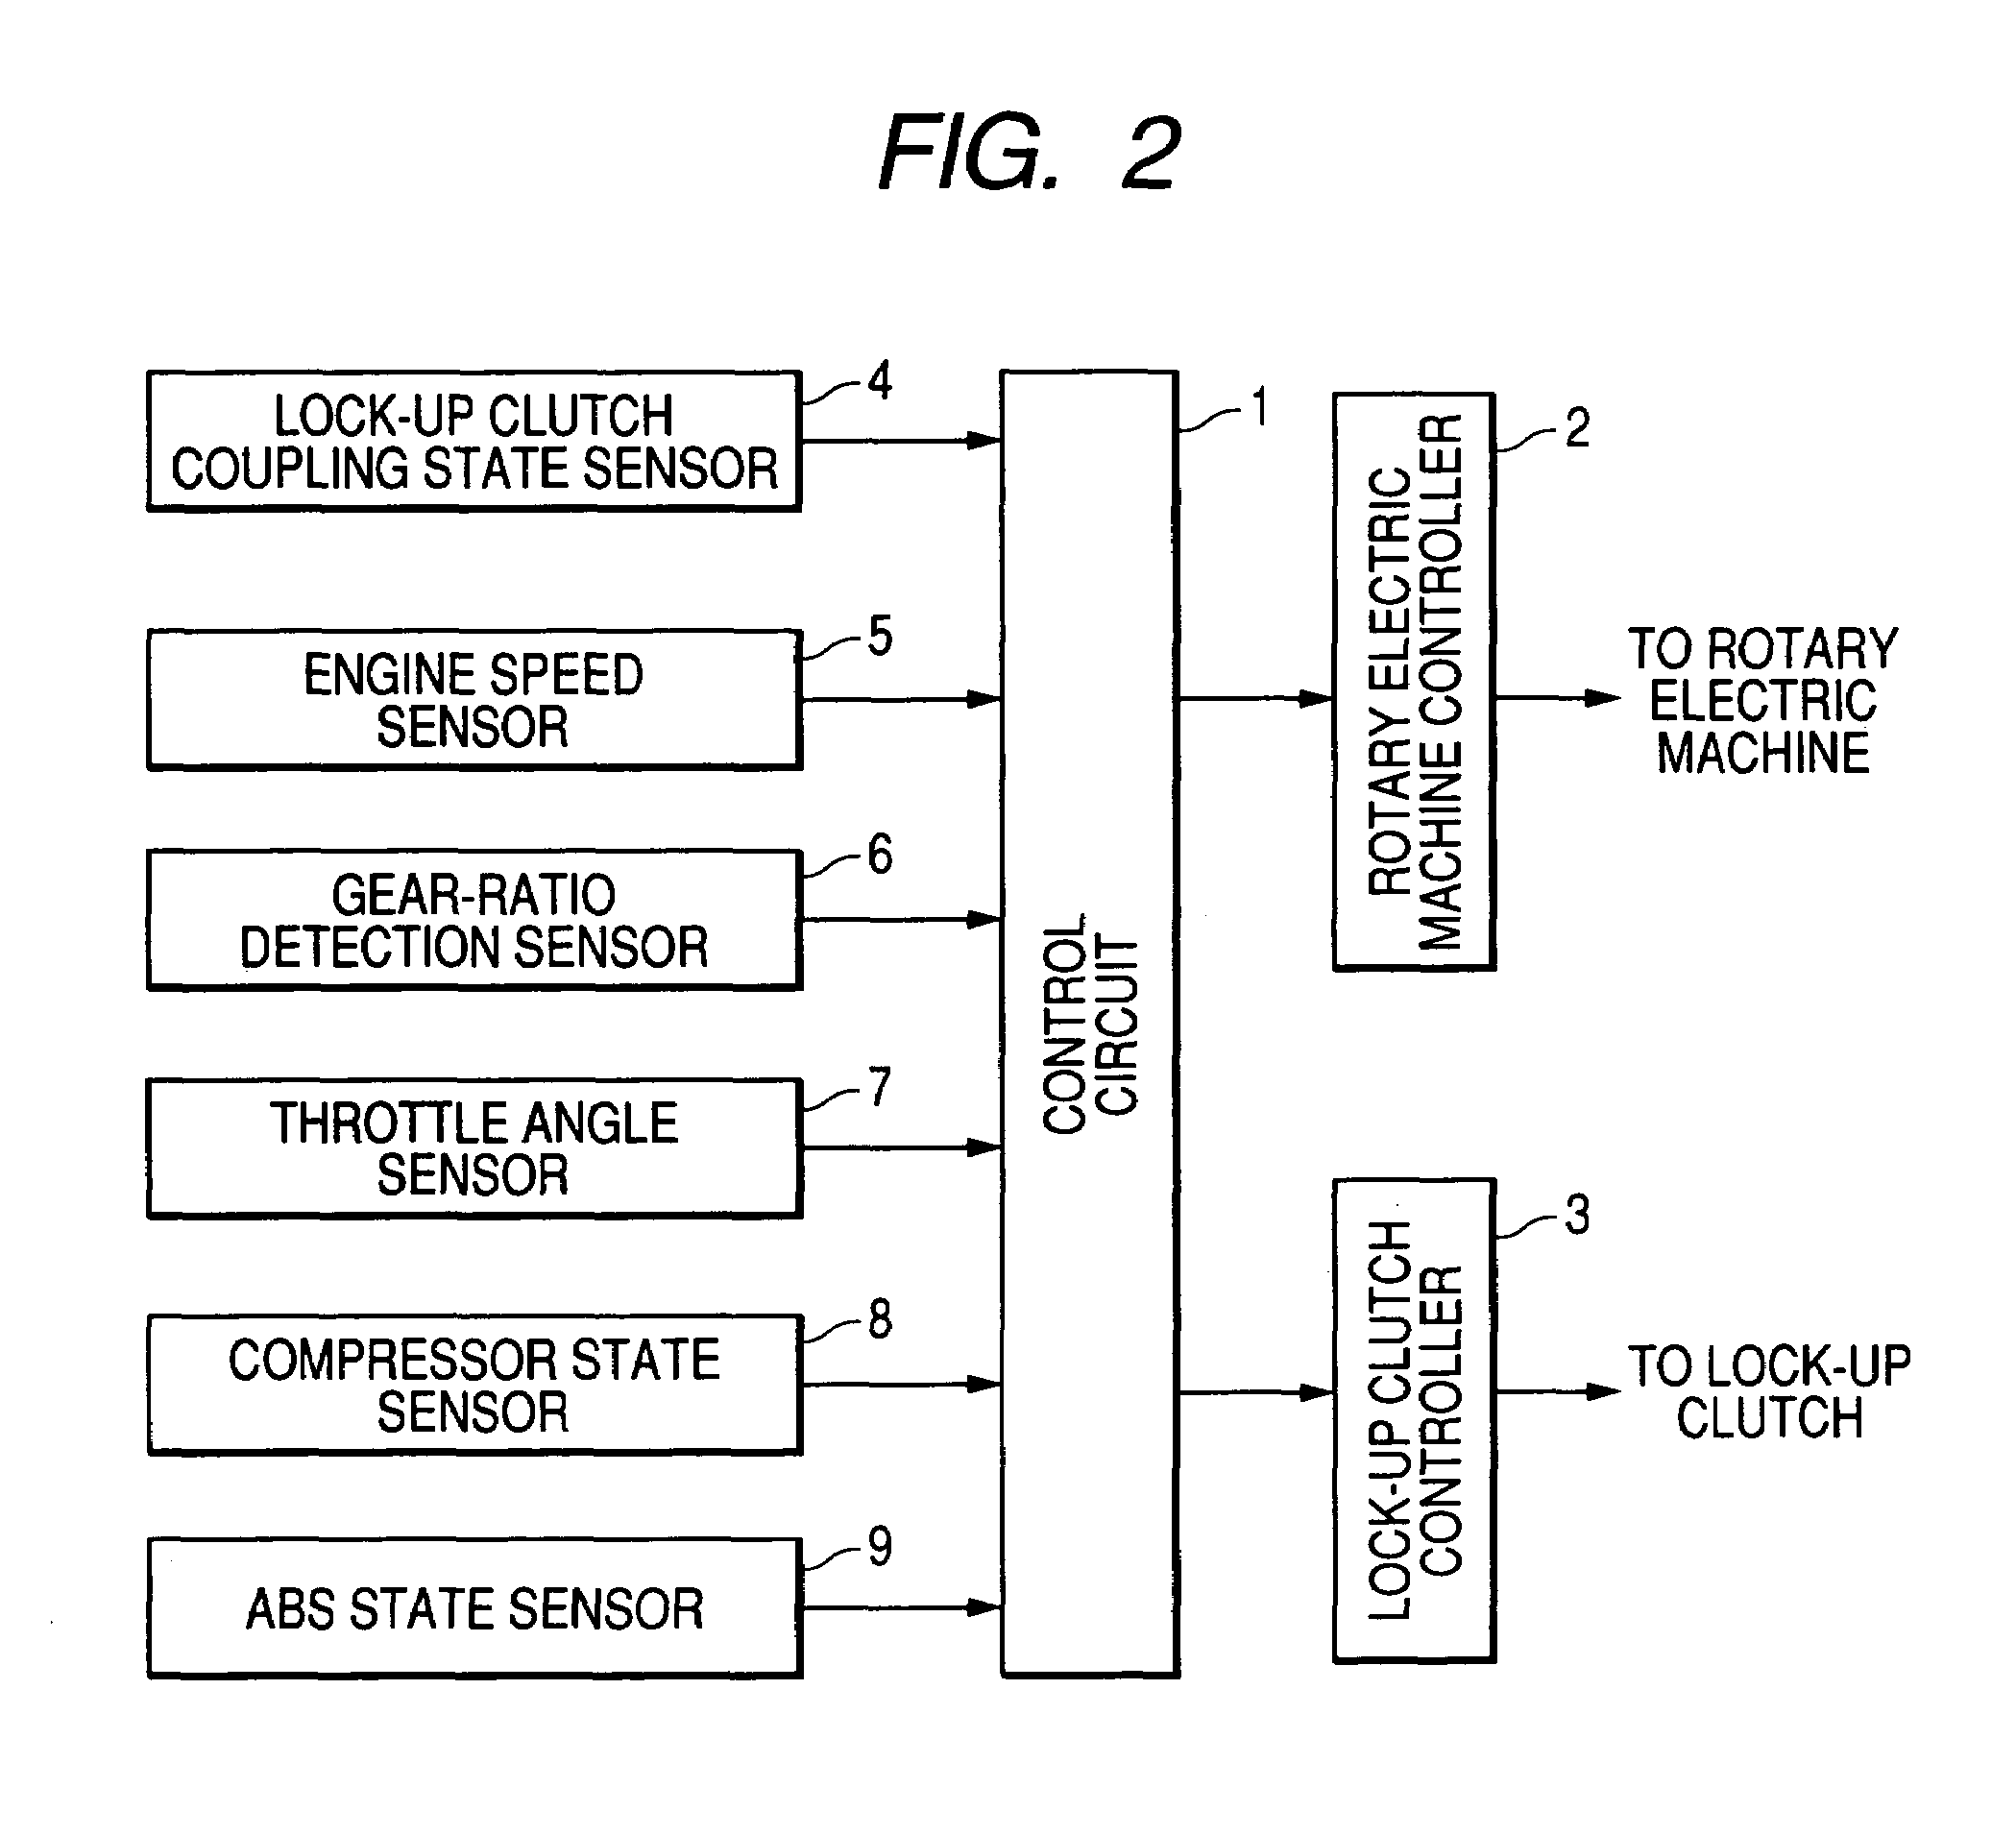 Regenerative control apparatus for vehicles equipped with a lock-up clutch